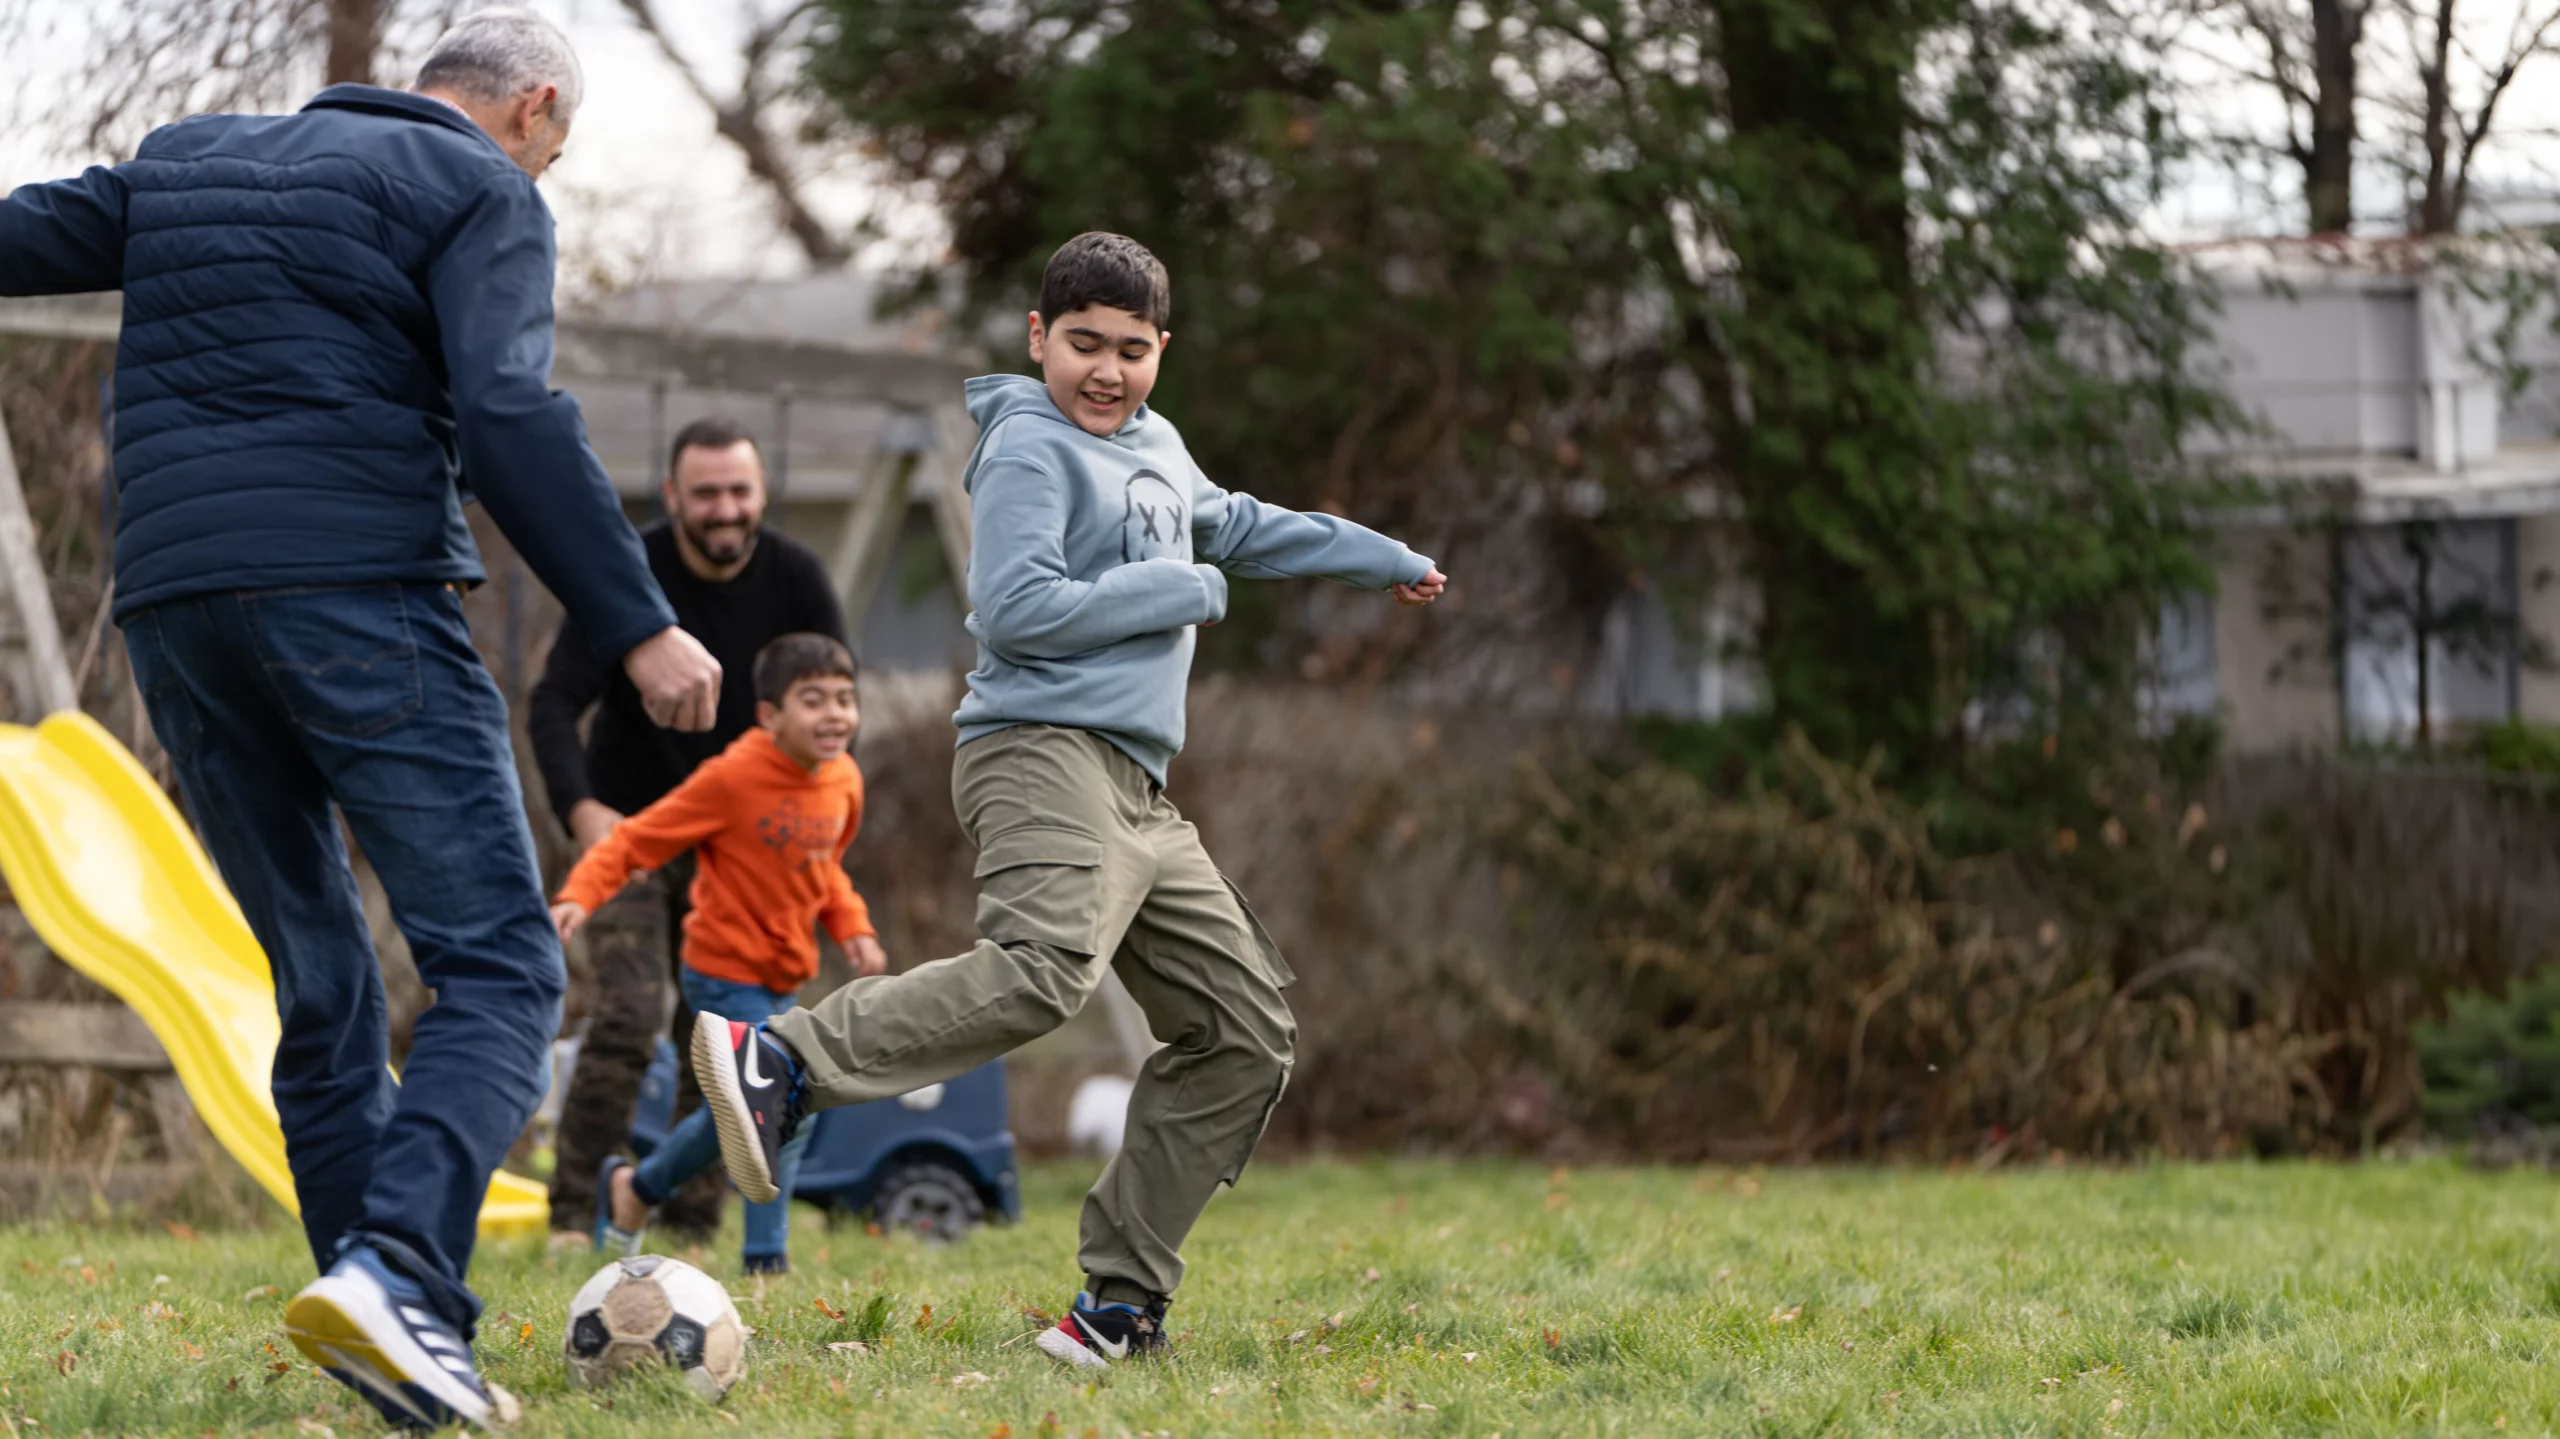 Heart-transplant patient playing soccer with his family.